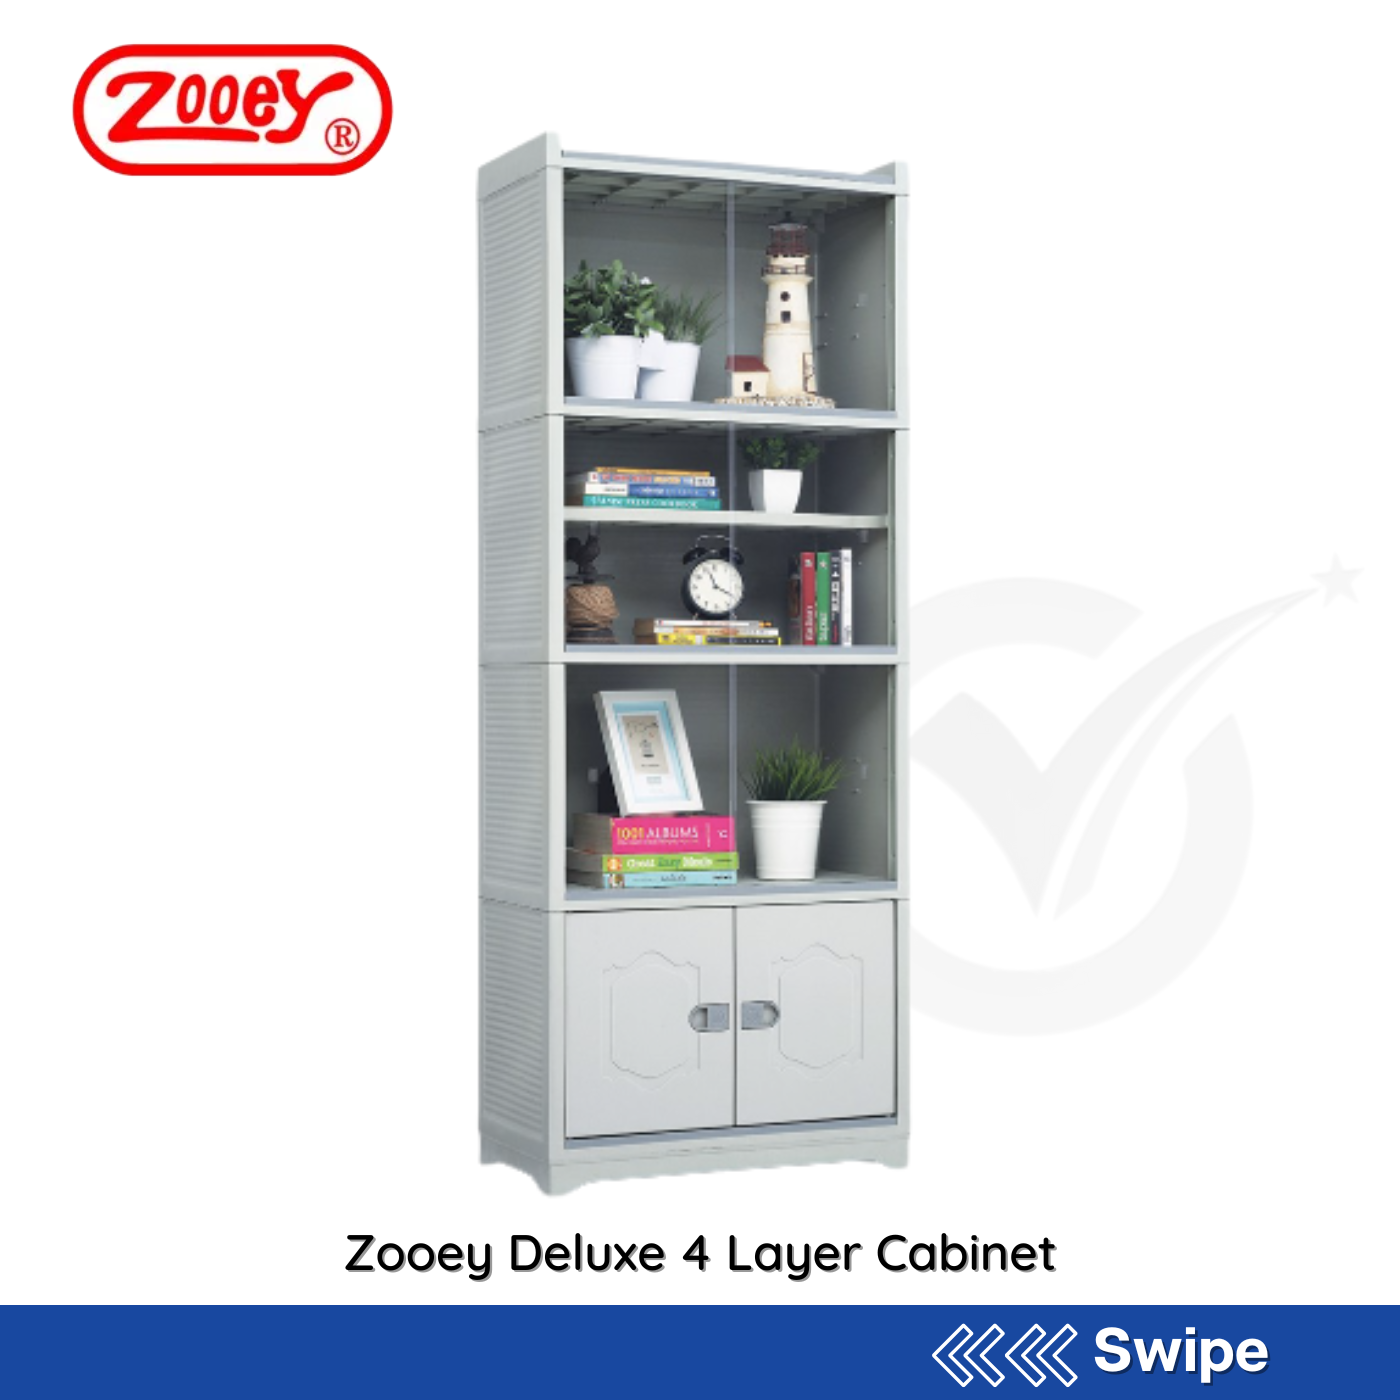 Zooey Deluxe 4 Layer Cabinet - People's Choice Marketing